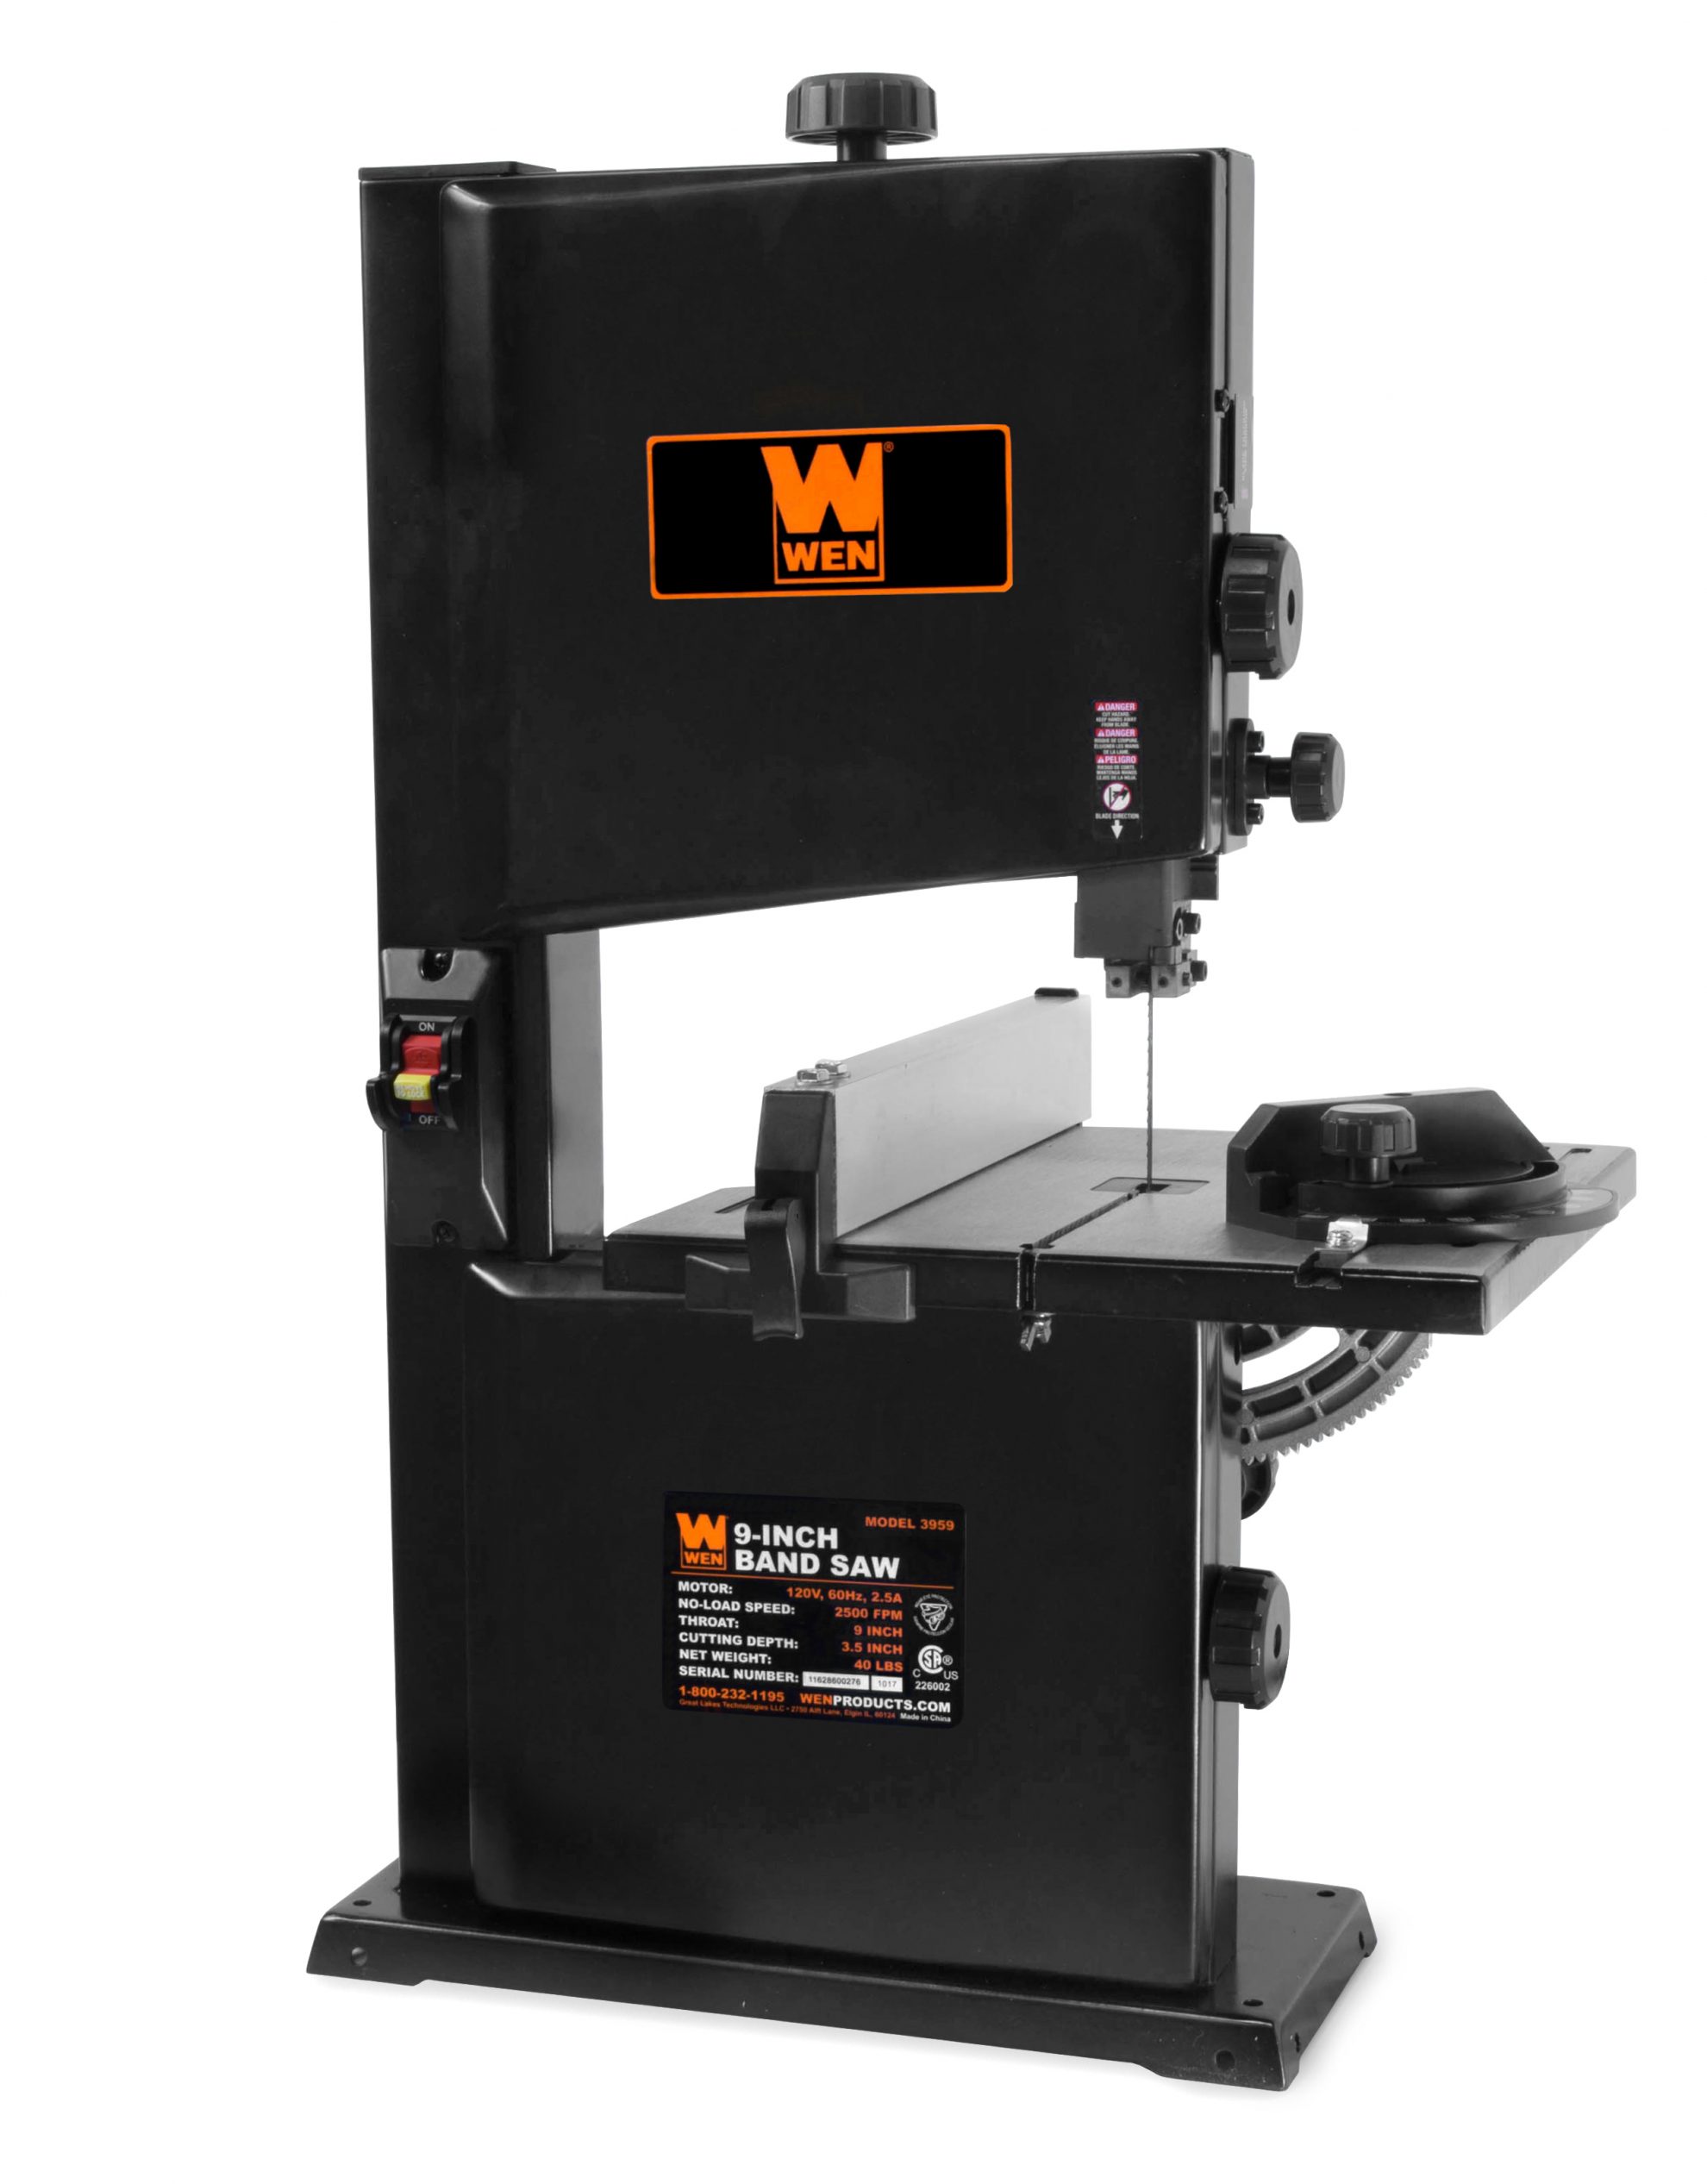 WEN 2.5Amp 9Inch Benchtop Band Saw, 3959 AwzHome The best at affordable prices